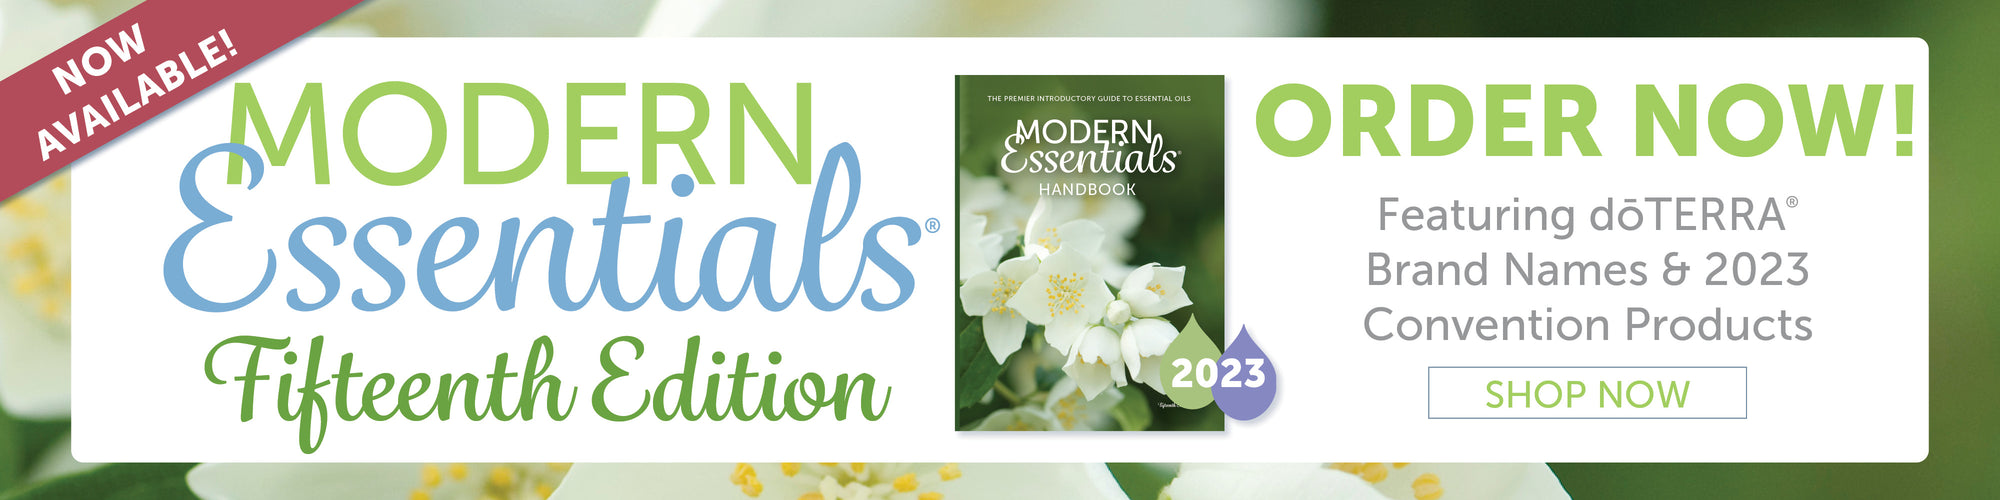 The 15th edition of the Modern Essentials Handbook with the new 2023 doTERRA oils is now available.